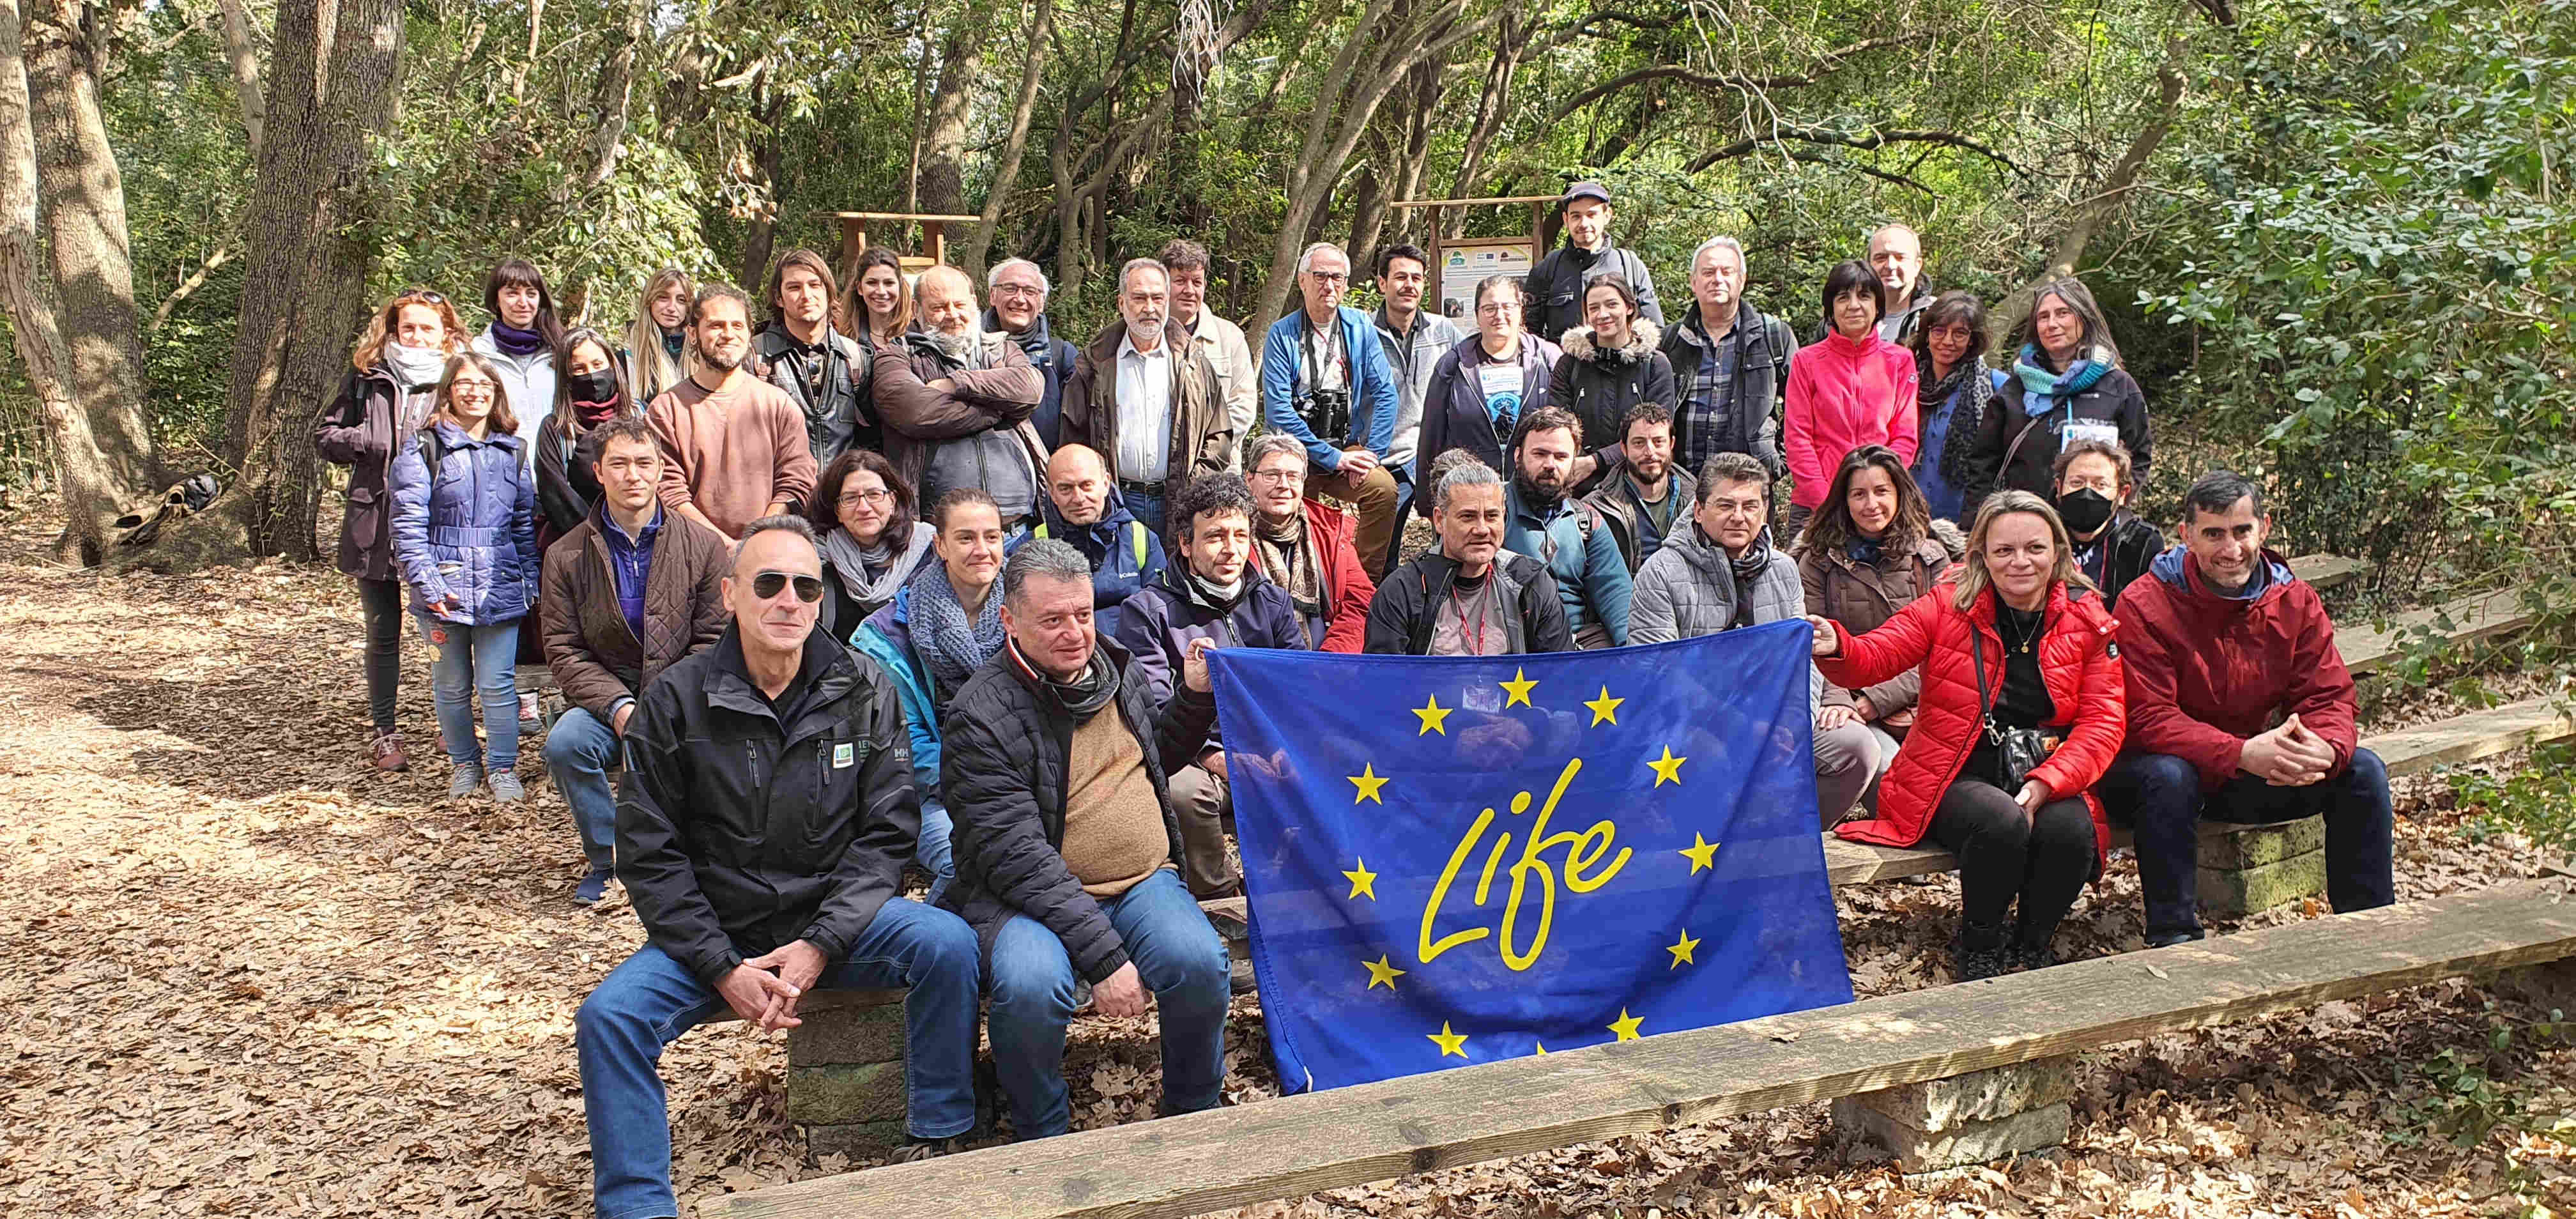 9-11 March 2022 - Natura 2000 Biogeographical Process – Networking Event at the Botanical Garden of Rome